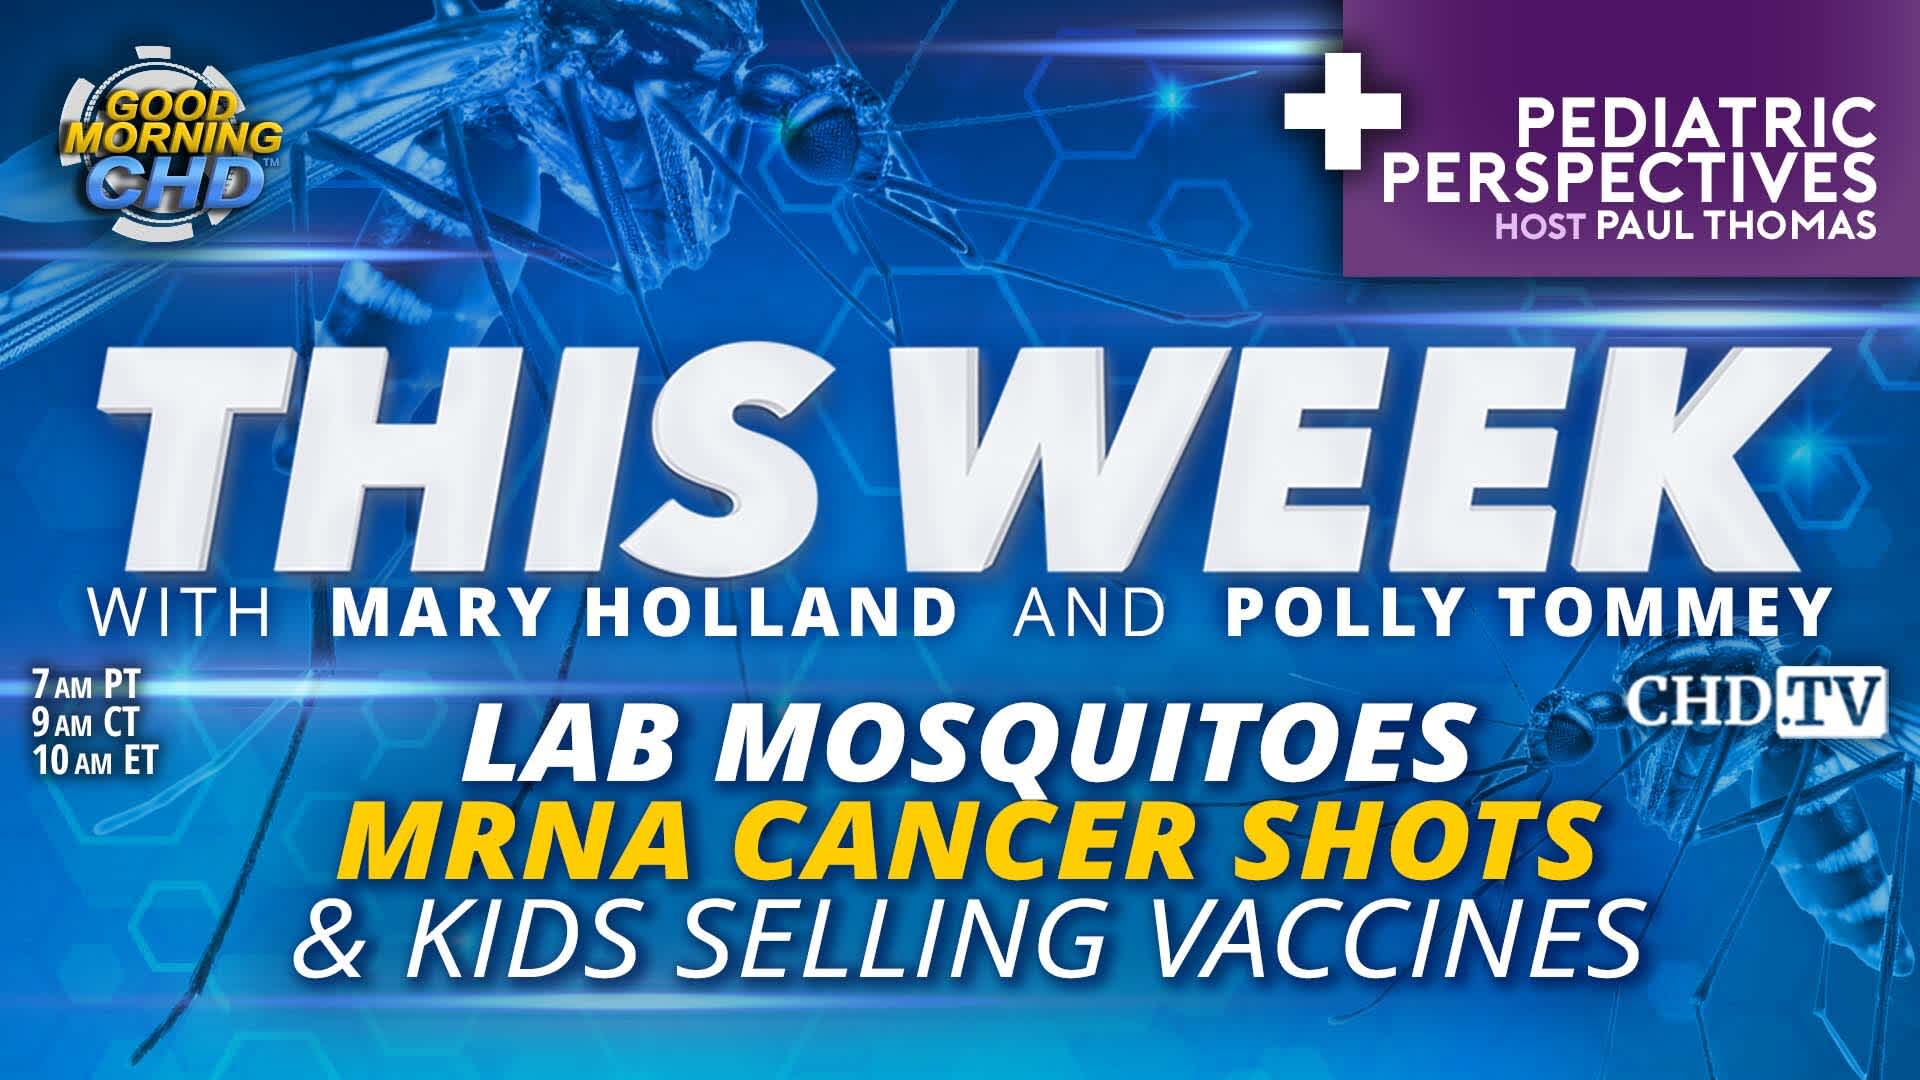 Lab Mosquitoes, mRNA Cancer Shots & Kids Selling Vaccines + Fluoride Dangers 